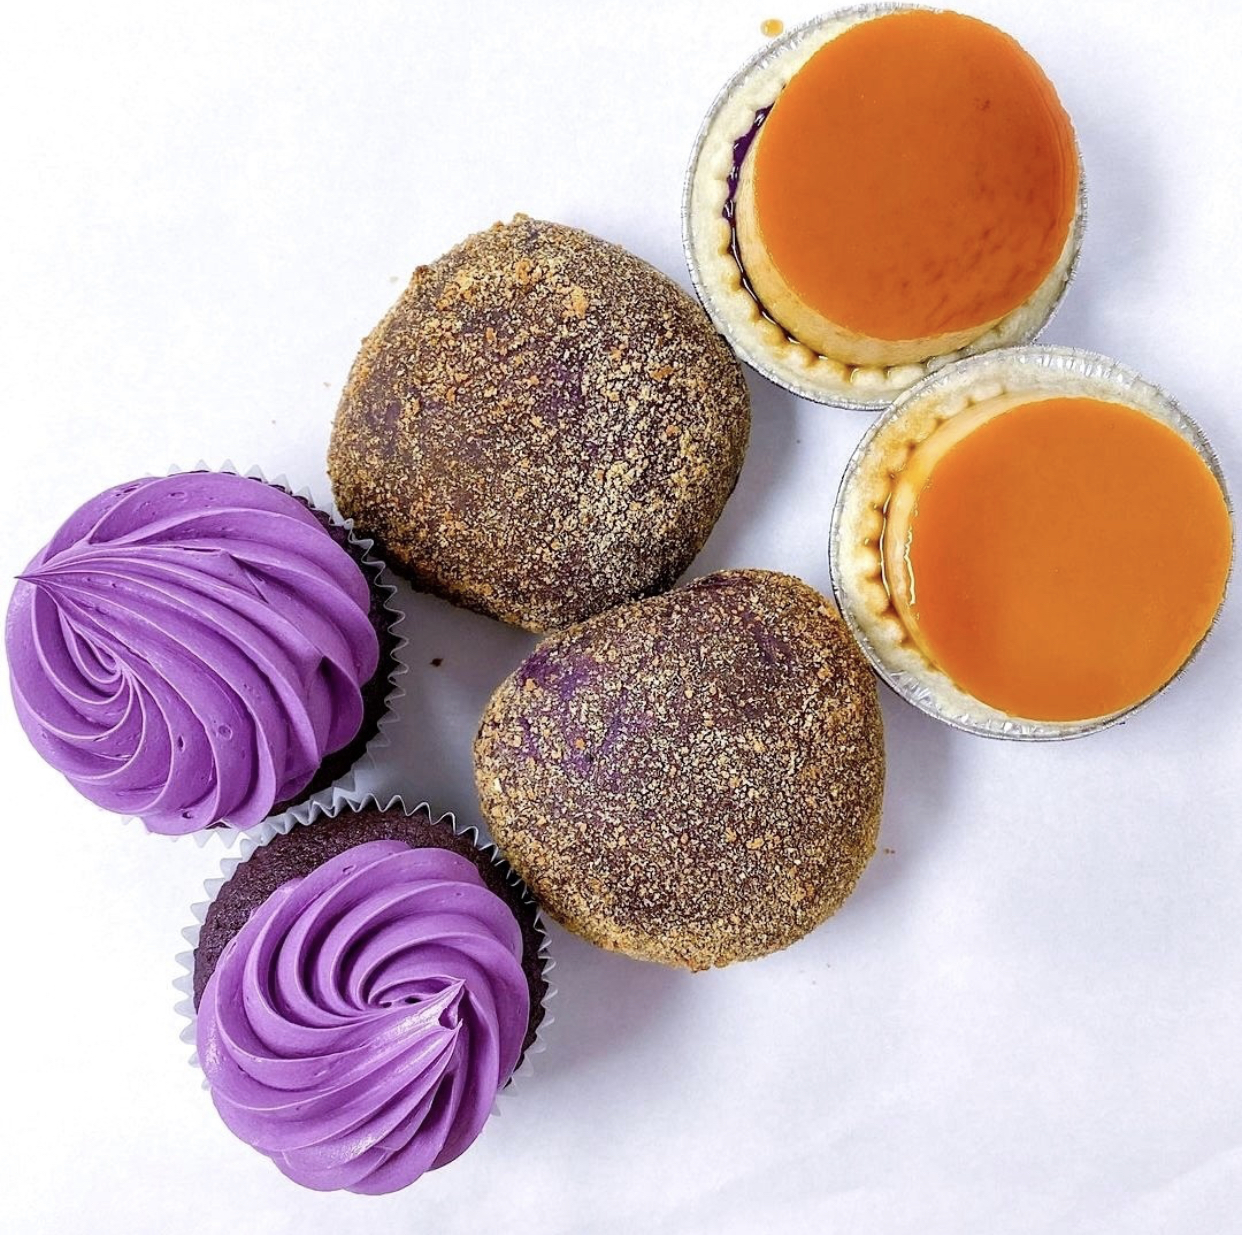 Two ube cupcakes, ube pandesals and ube flan cheesecakes, on a white background.